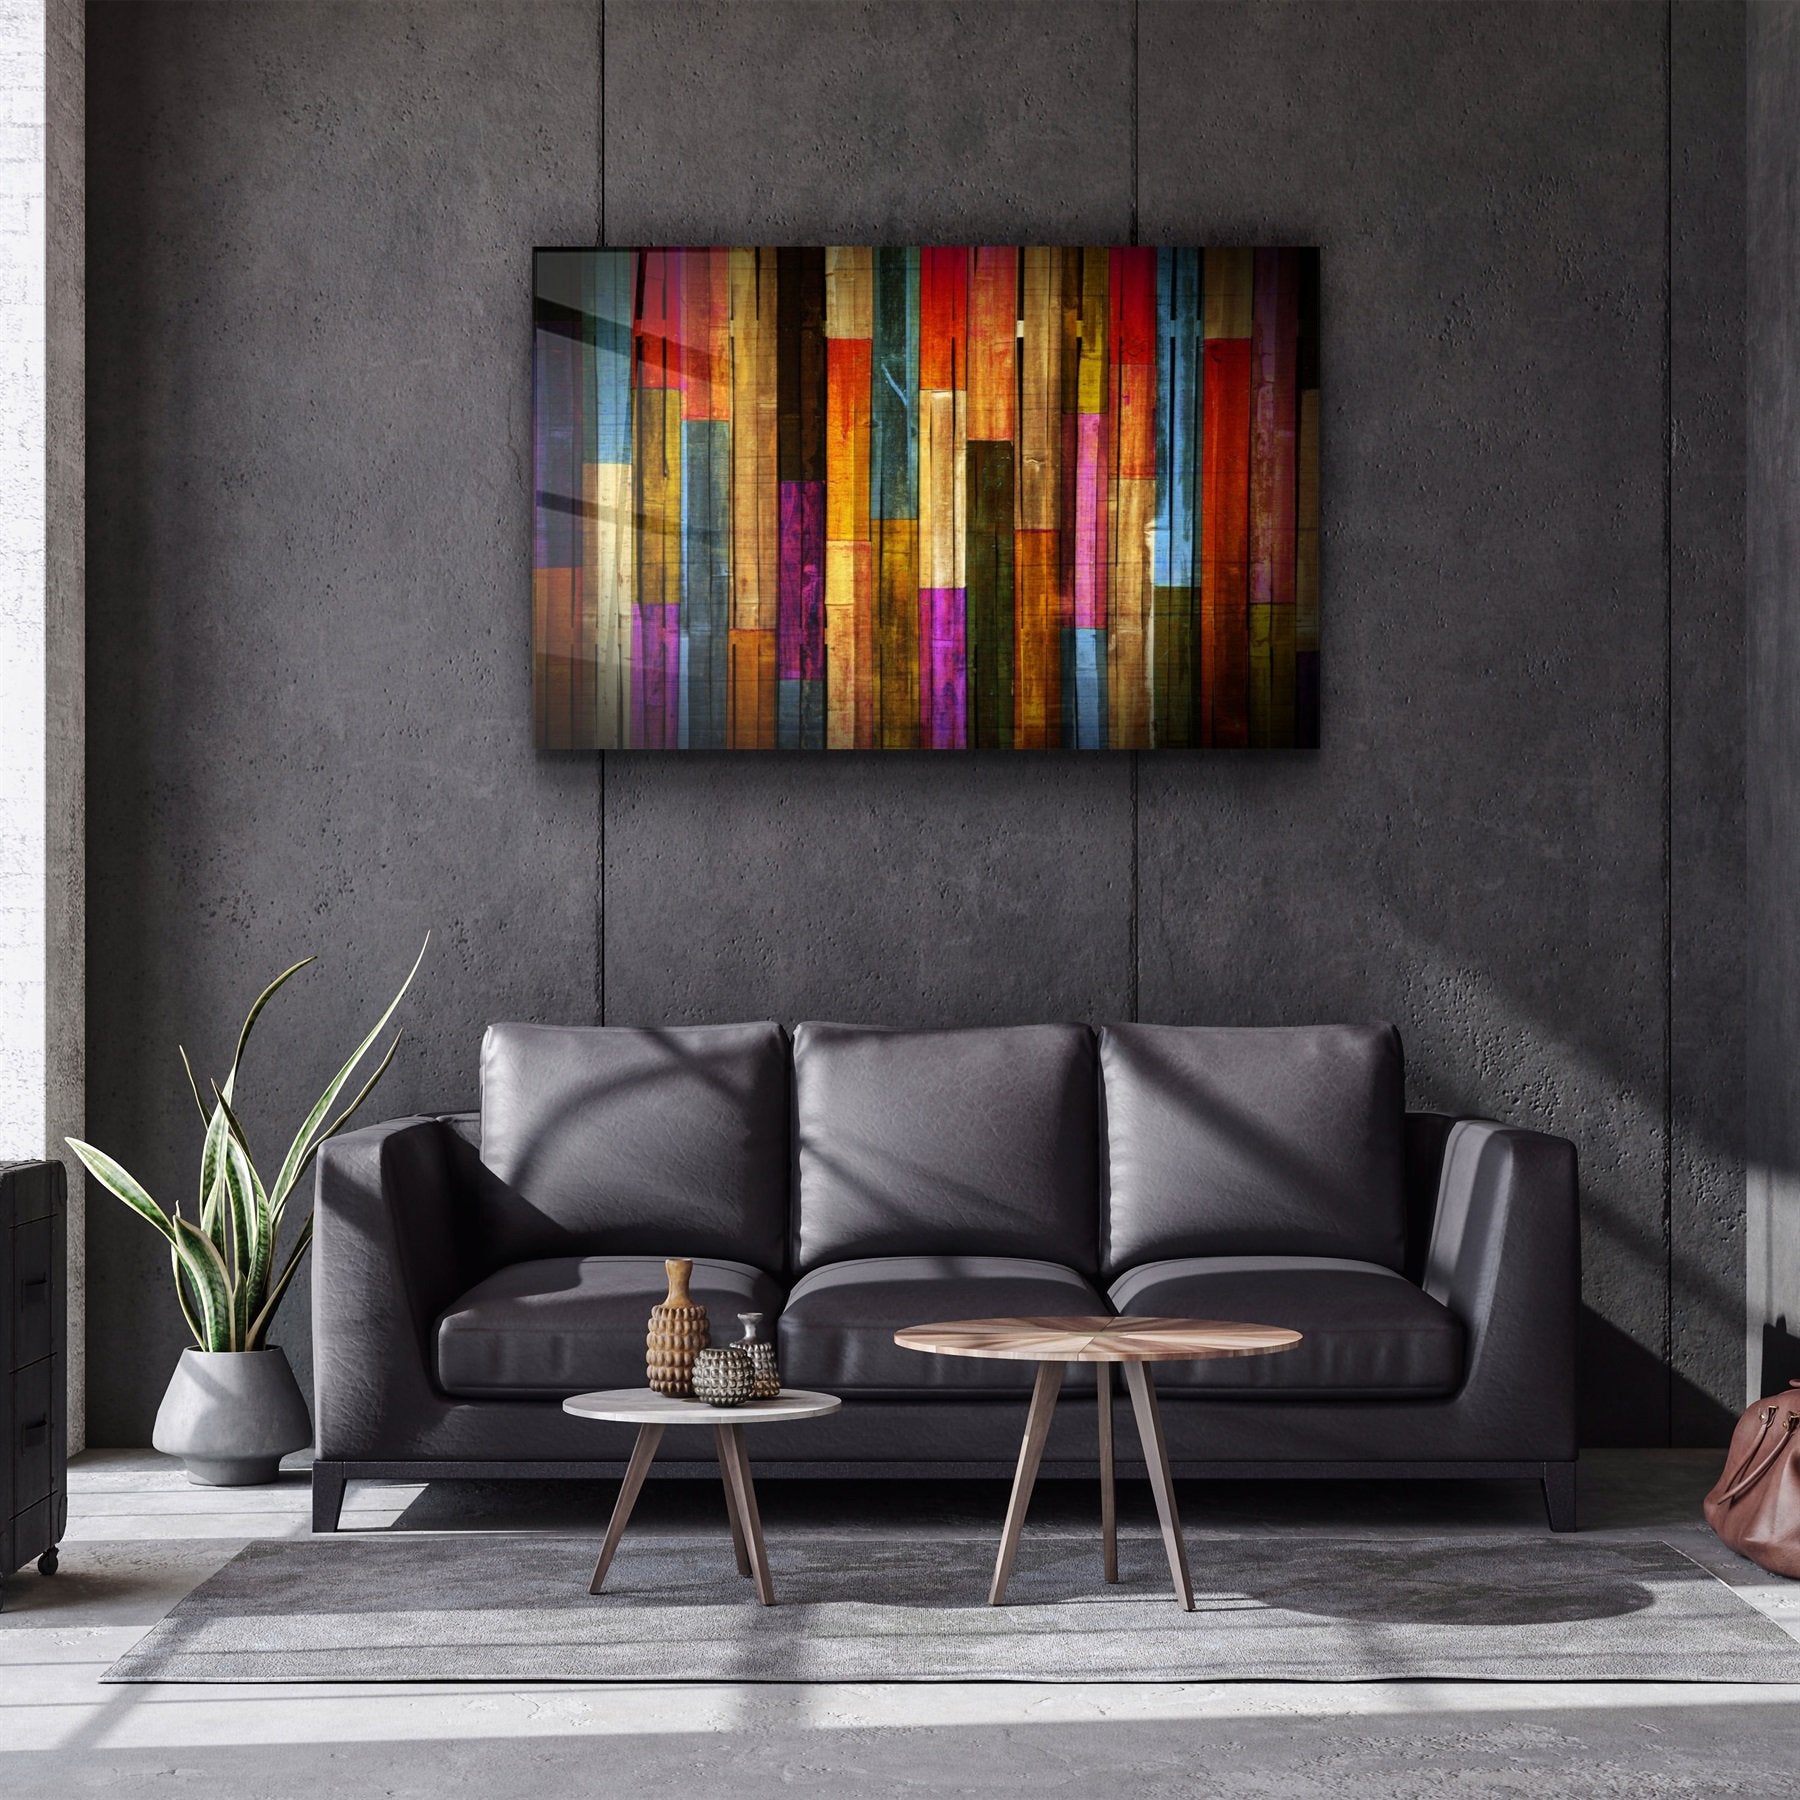 ・"Painted Wood"・Glass Wall Art